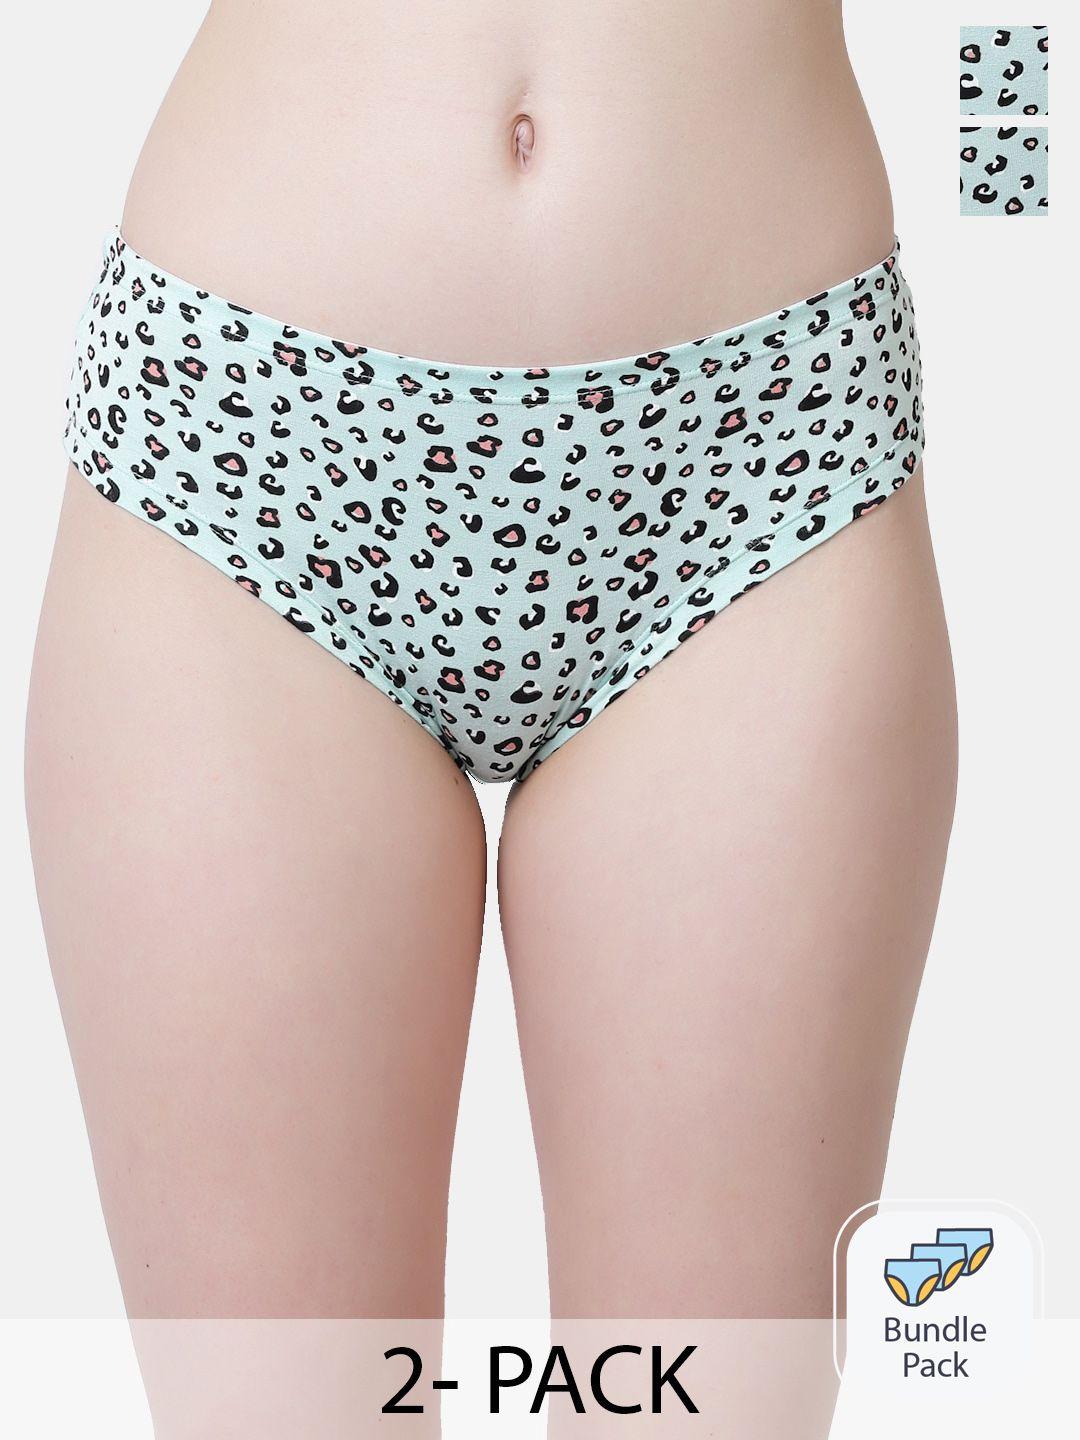 inner sense pack of 2 animal printed mid-rise basic briefs with anti microbial